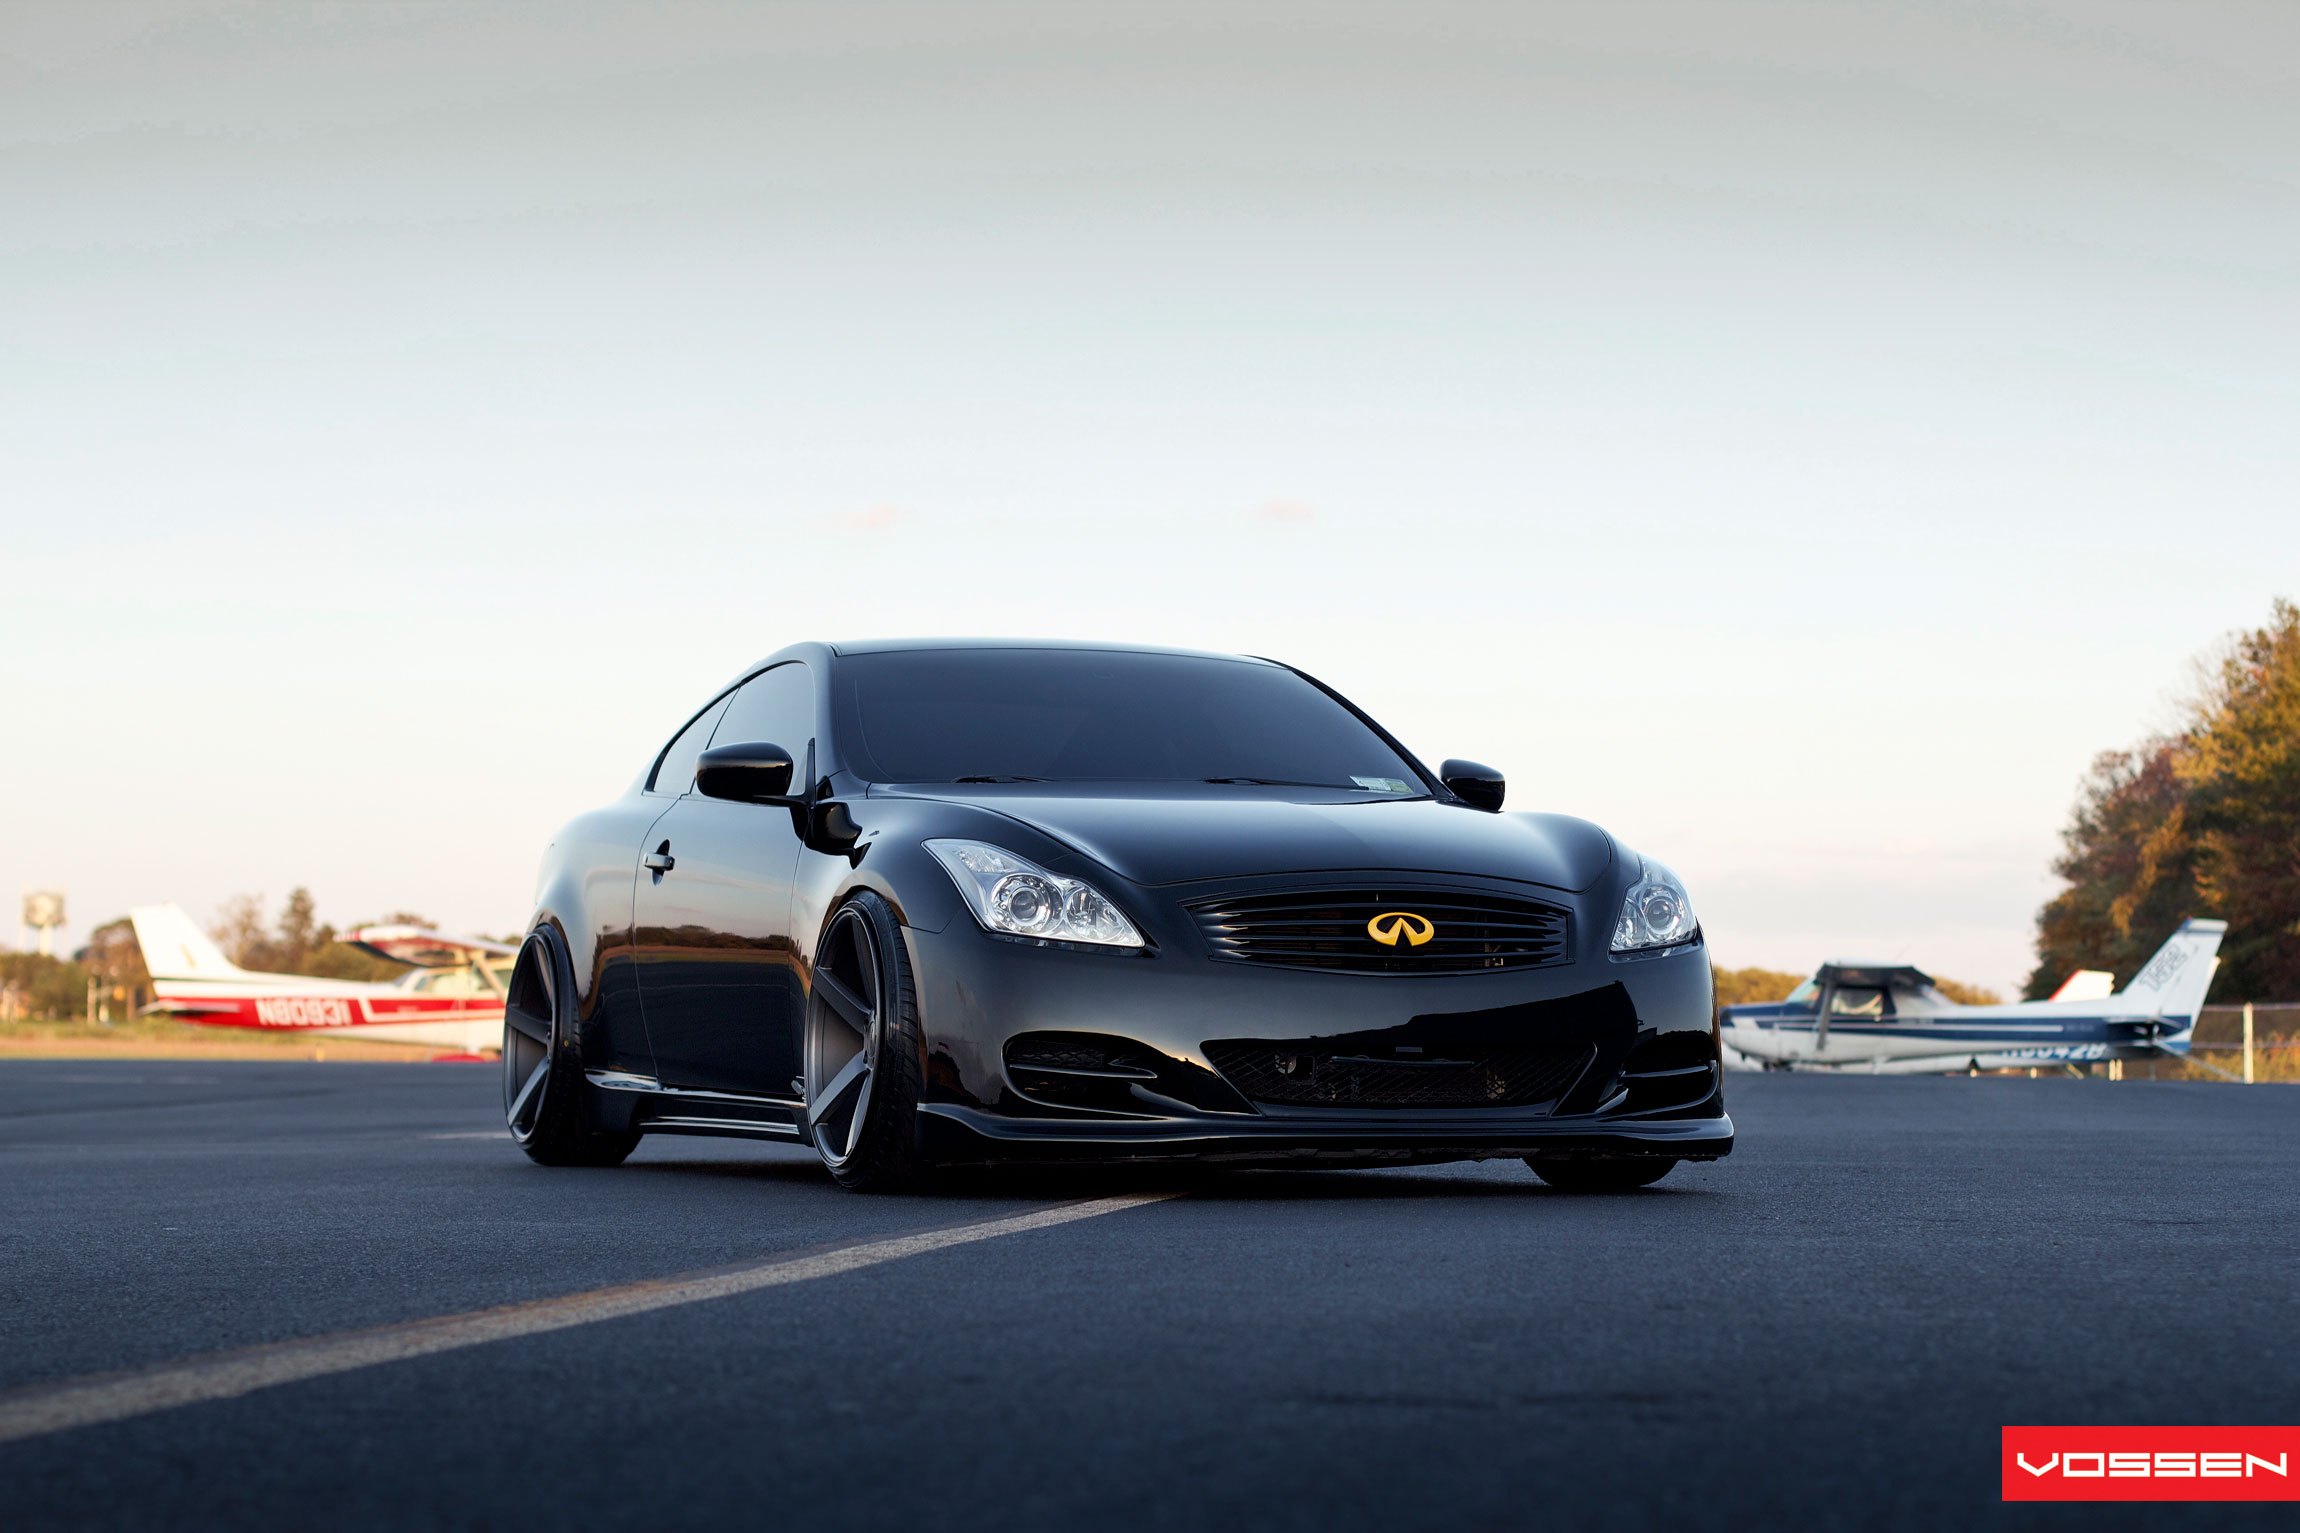 Blacked Out Grille with Custom Emblem on Infiniti G37 - Photo by Vossen